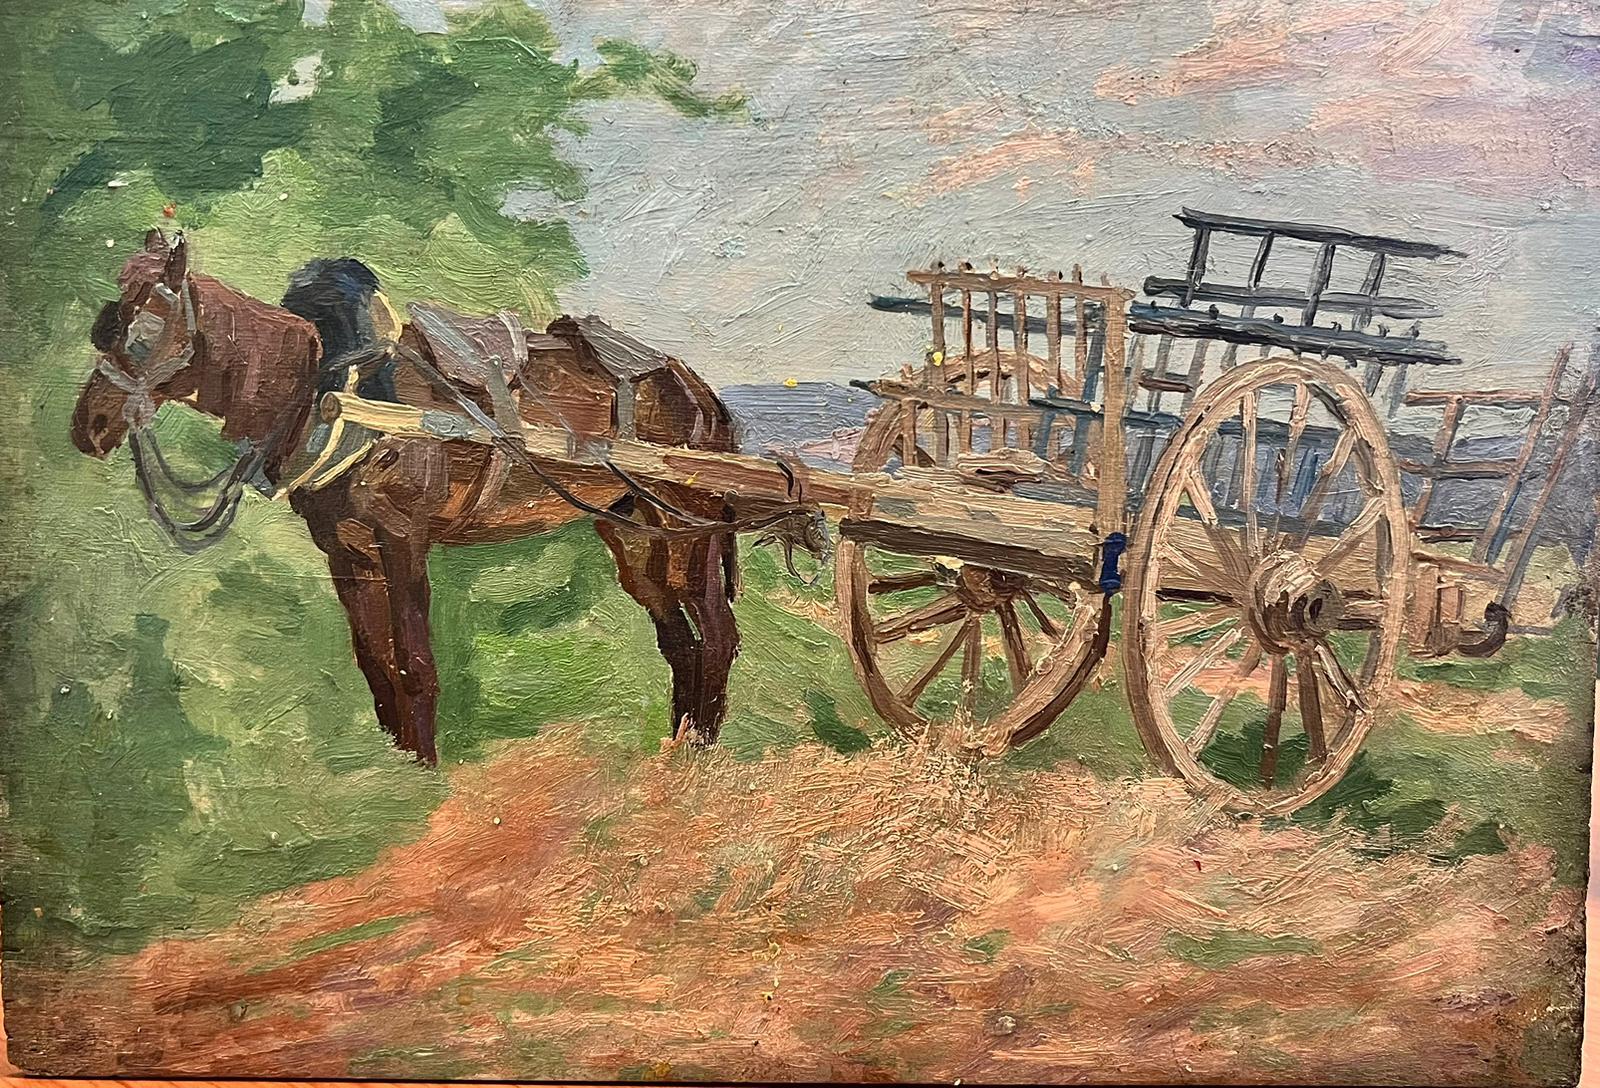 Artist/ School: Suzanne Crochet (French c. 1930), female French Impressionist artist

Title: The Hay Cart

Medium: oil on board, unframed

Size:

board: 9.5 x 13 inches

Provenance: private collection, France

Condition: The painting is in overall